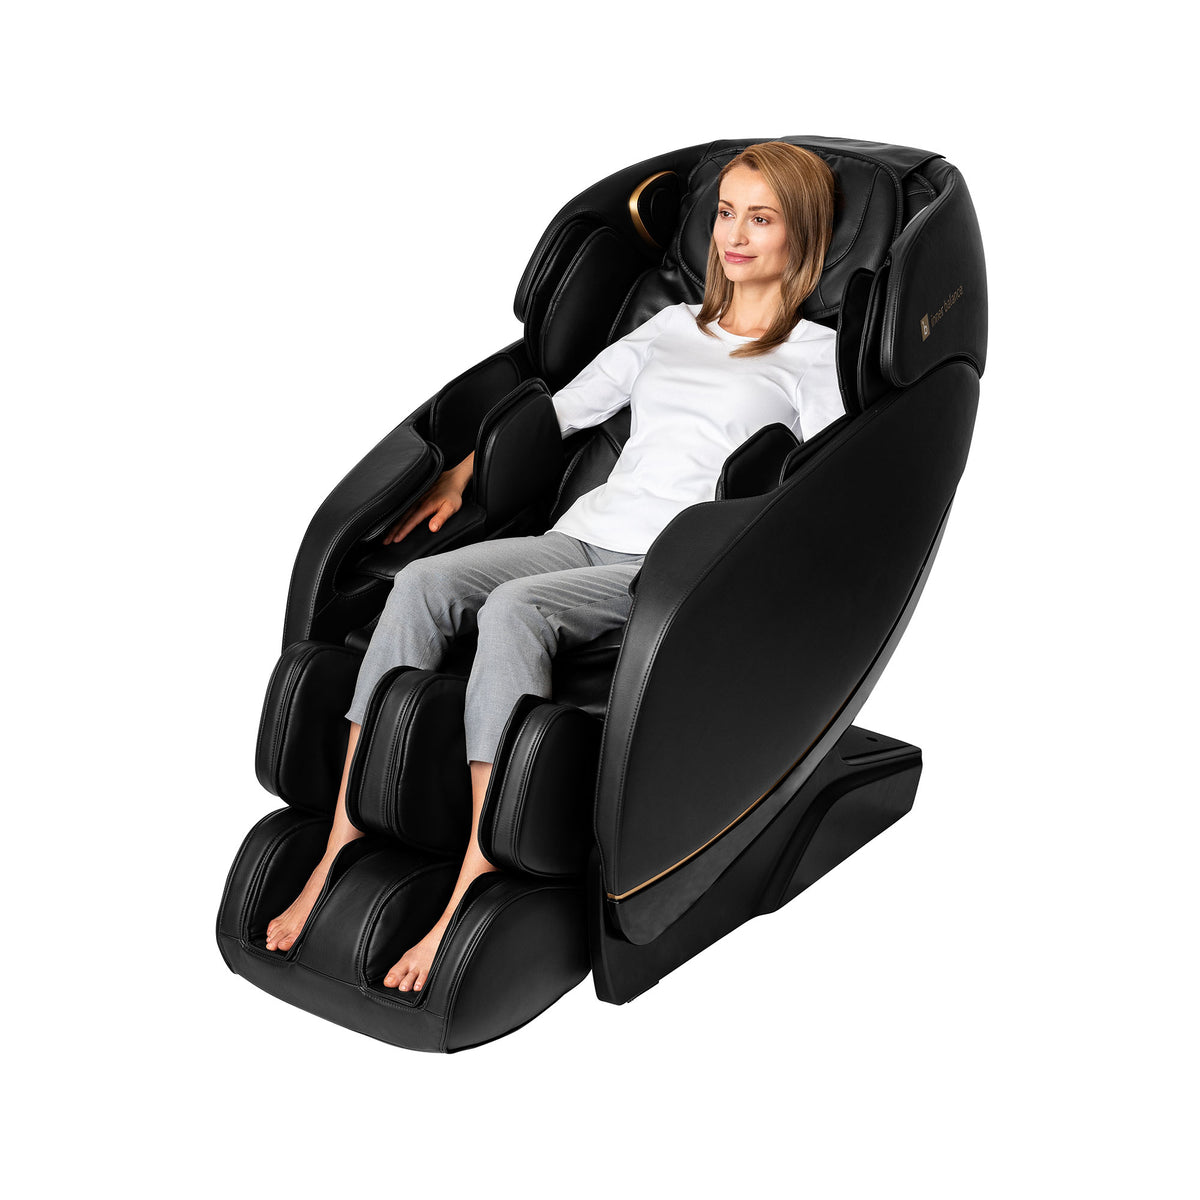 User experiencing the relaxation features of the Inner Balance Wellness Jin 2.0 Massage Chair